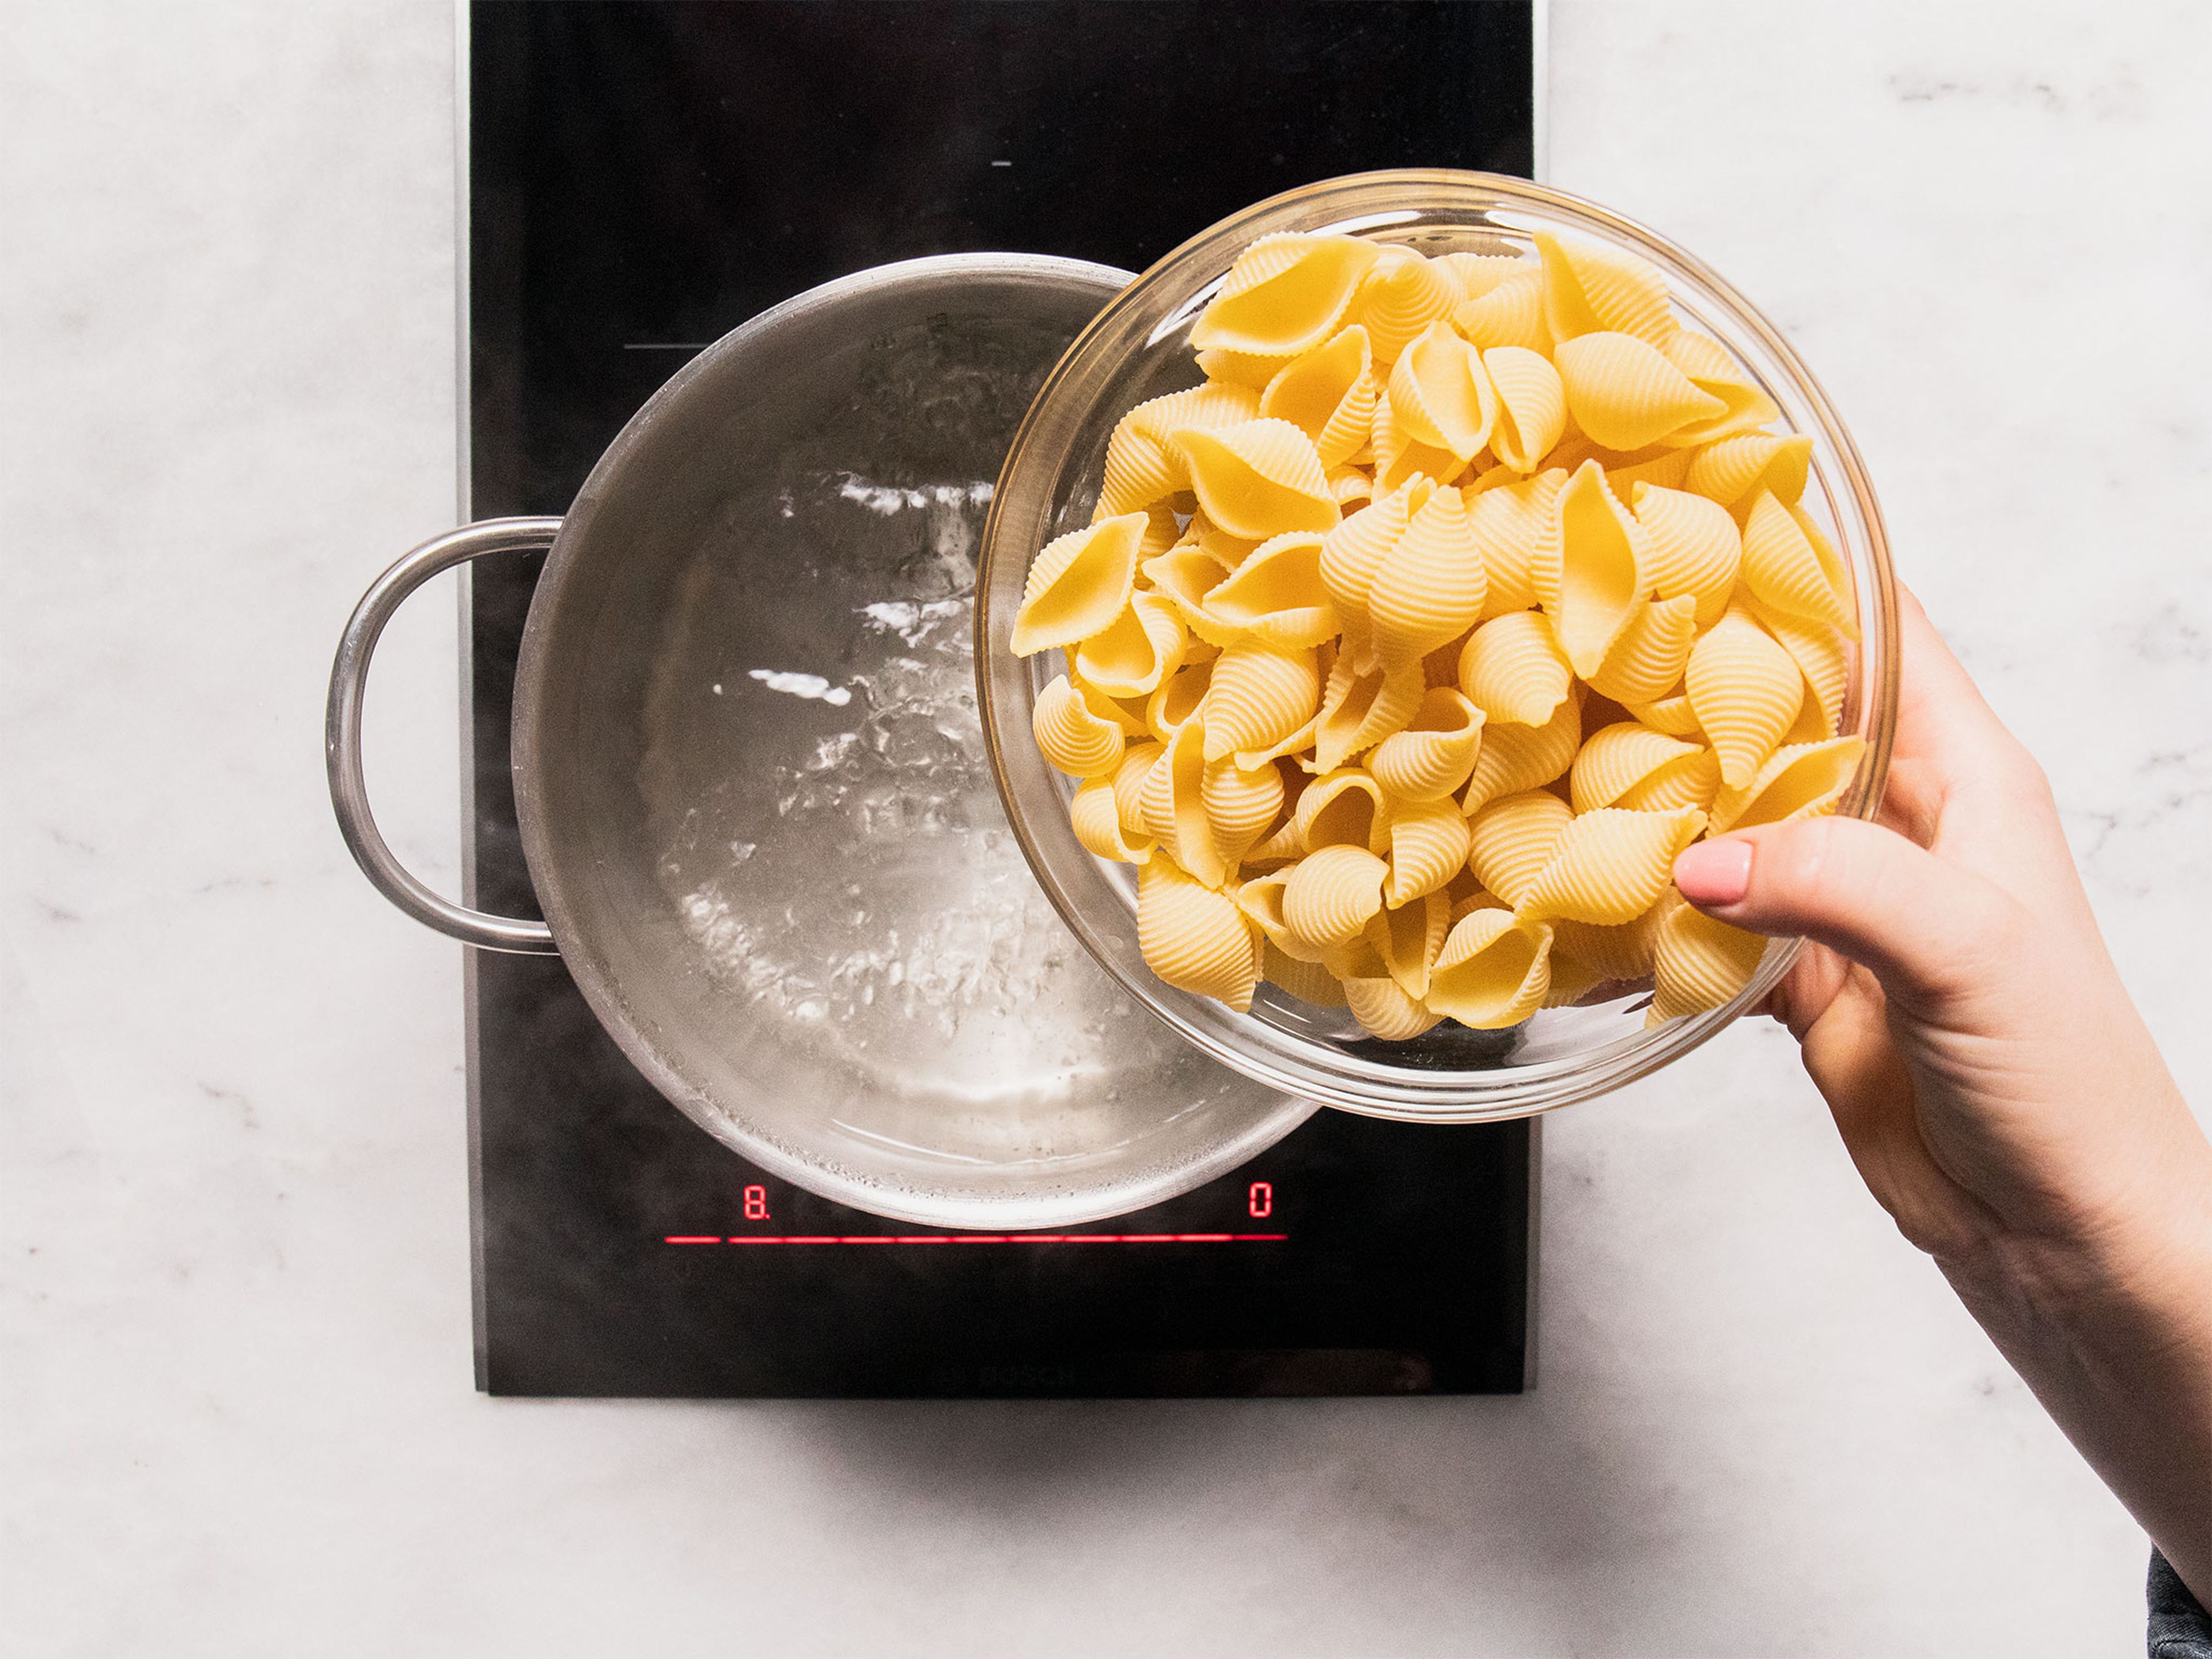 Bring a pot of water and salt to a boil. Cook the conchiglioni according to package instructions or until al dente, then drain, and mix with the pumpkin sauce.